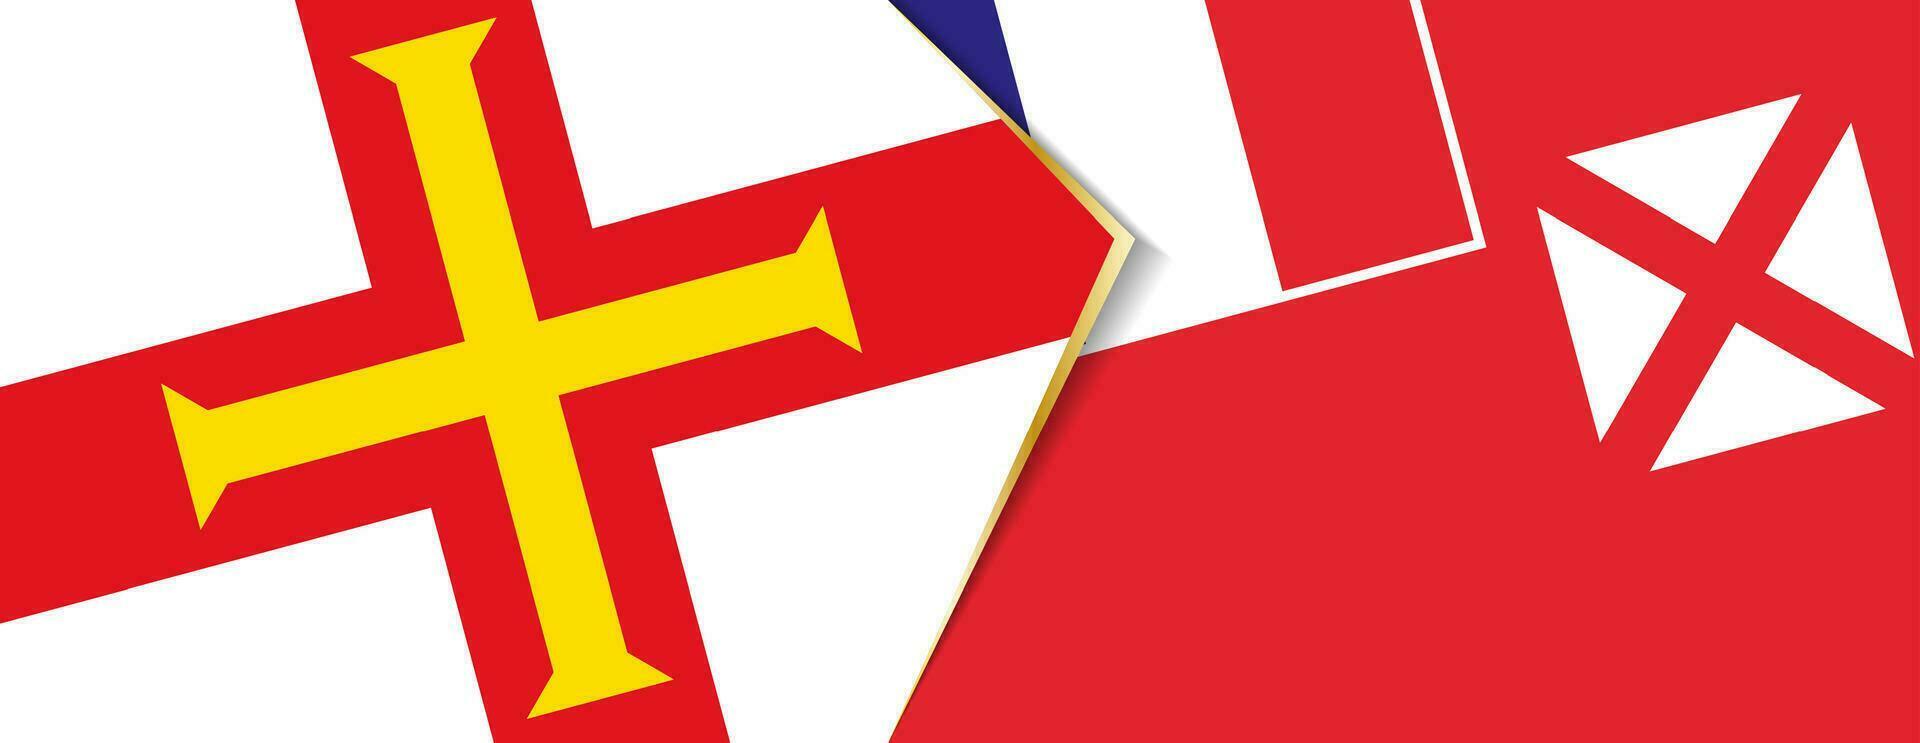 Guernsey and Wallis and Futuna flags, two vector flags.